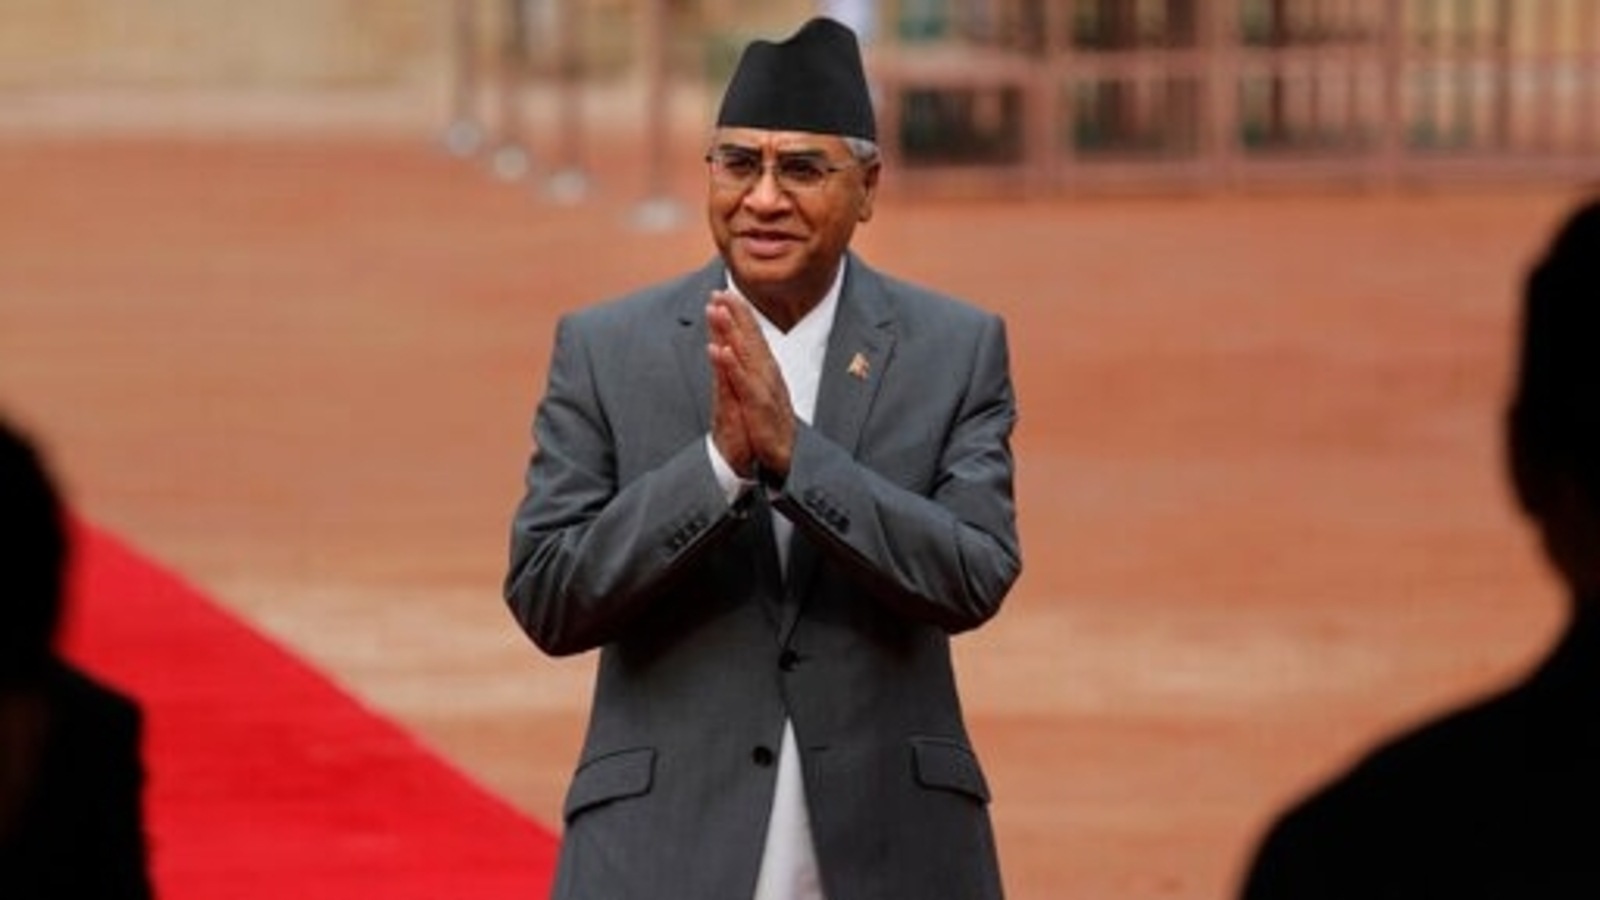 After brief delay, Sher Bahadur Deuba takes oath as Nepal’s PM for fifth time | World News